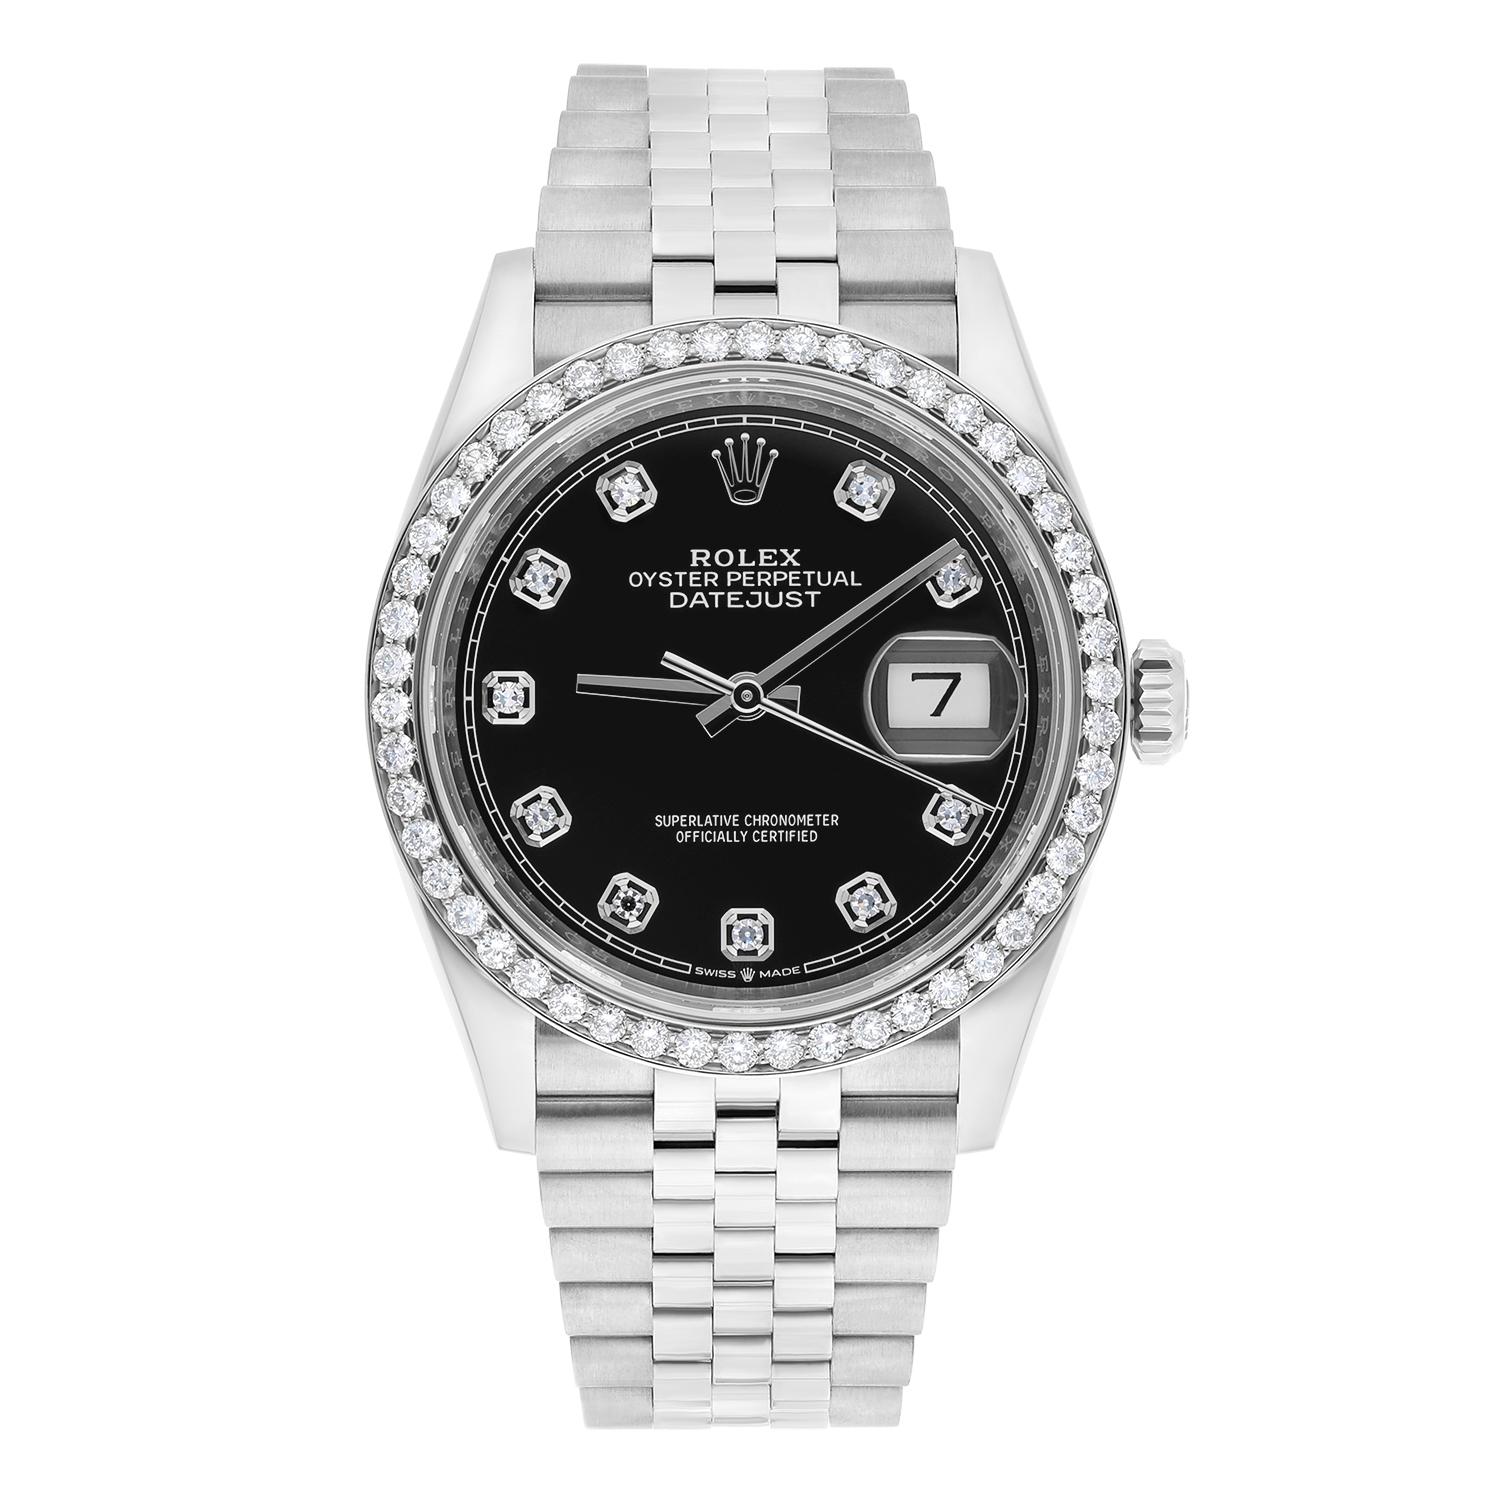 Bezel: Custom bezel, diamonds set aftermarket. Diamonds 100% natural. Carat Weight: 1.60 carats in total diamond weight. The sale includes Rolex box, papers and appraisal certificate. Attached to the appraisal certificate is our in-house mechanical